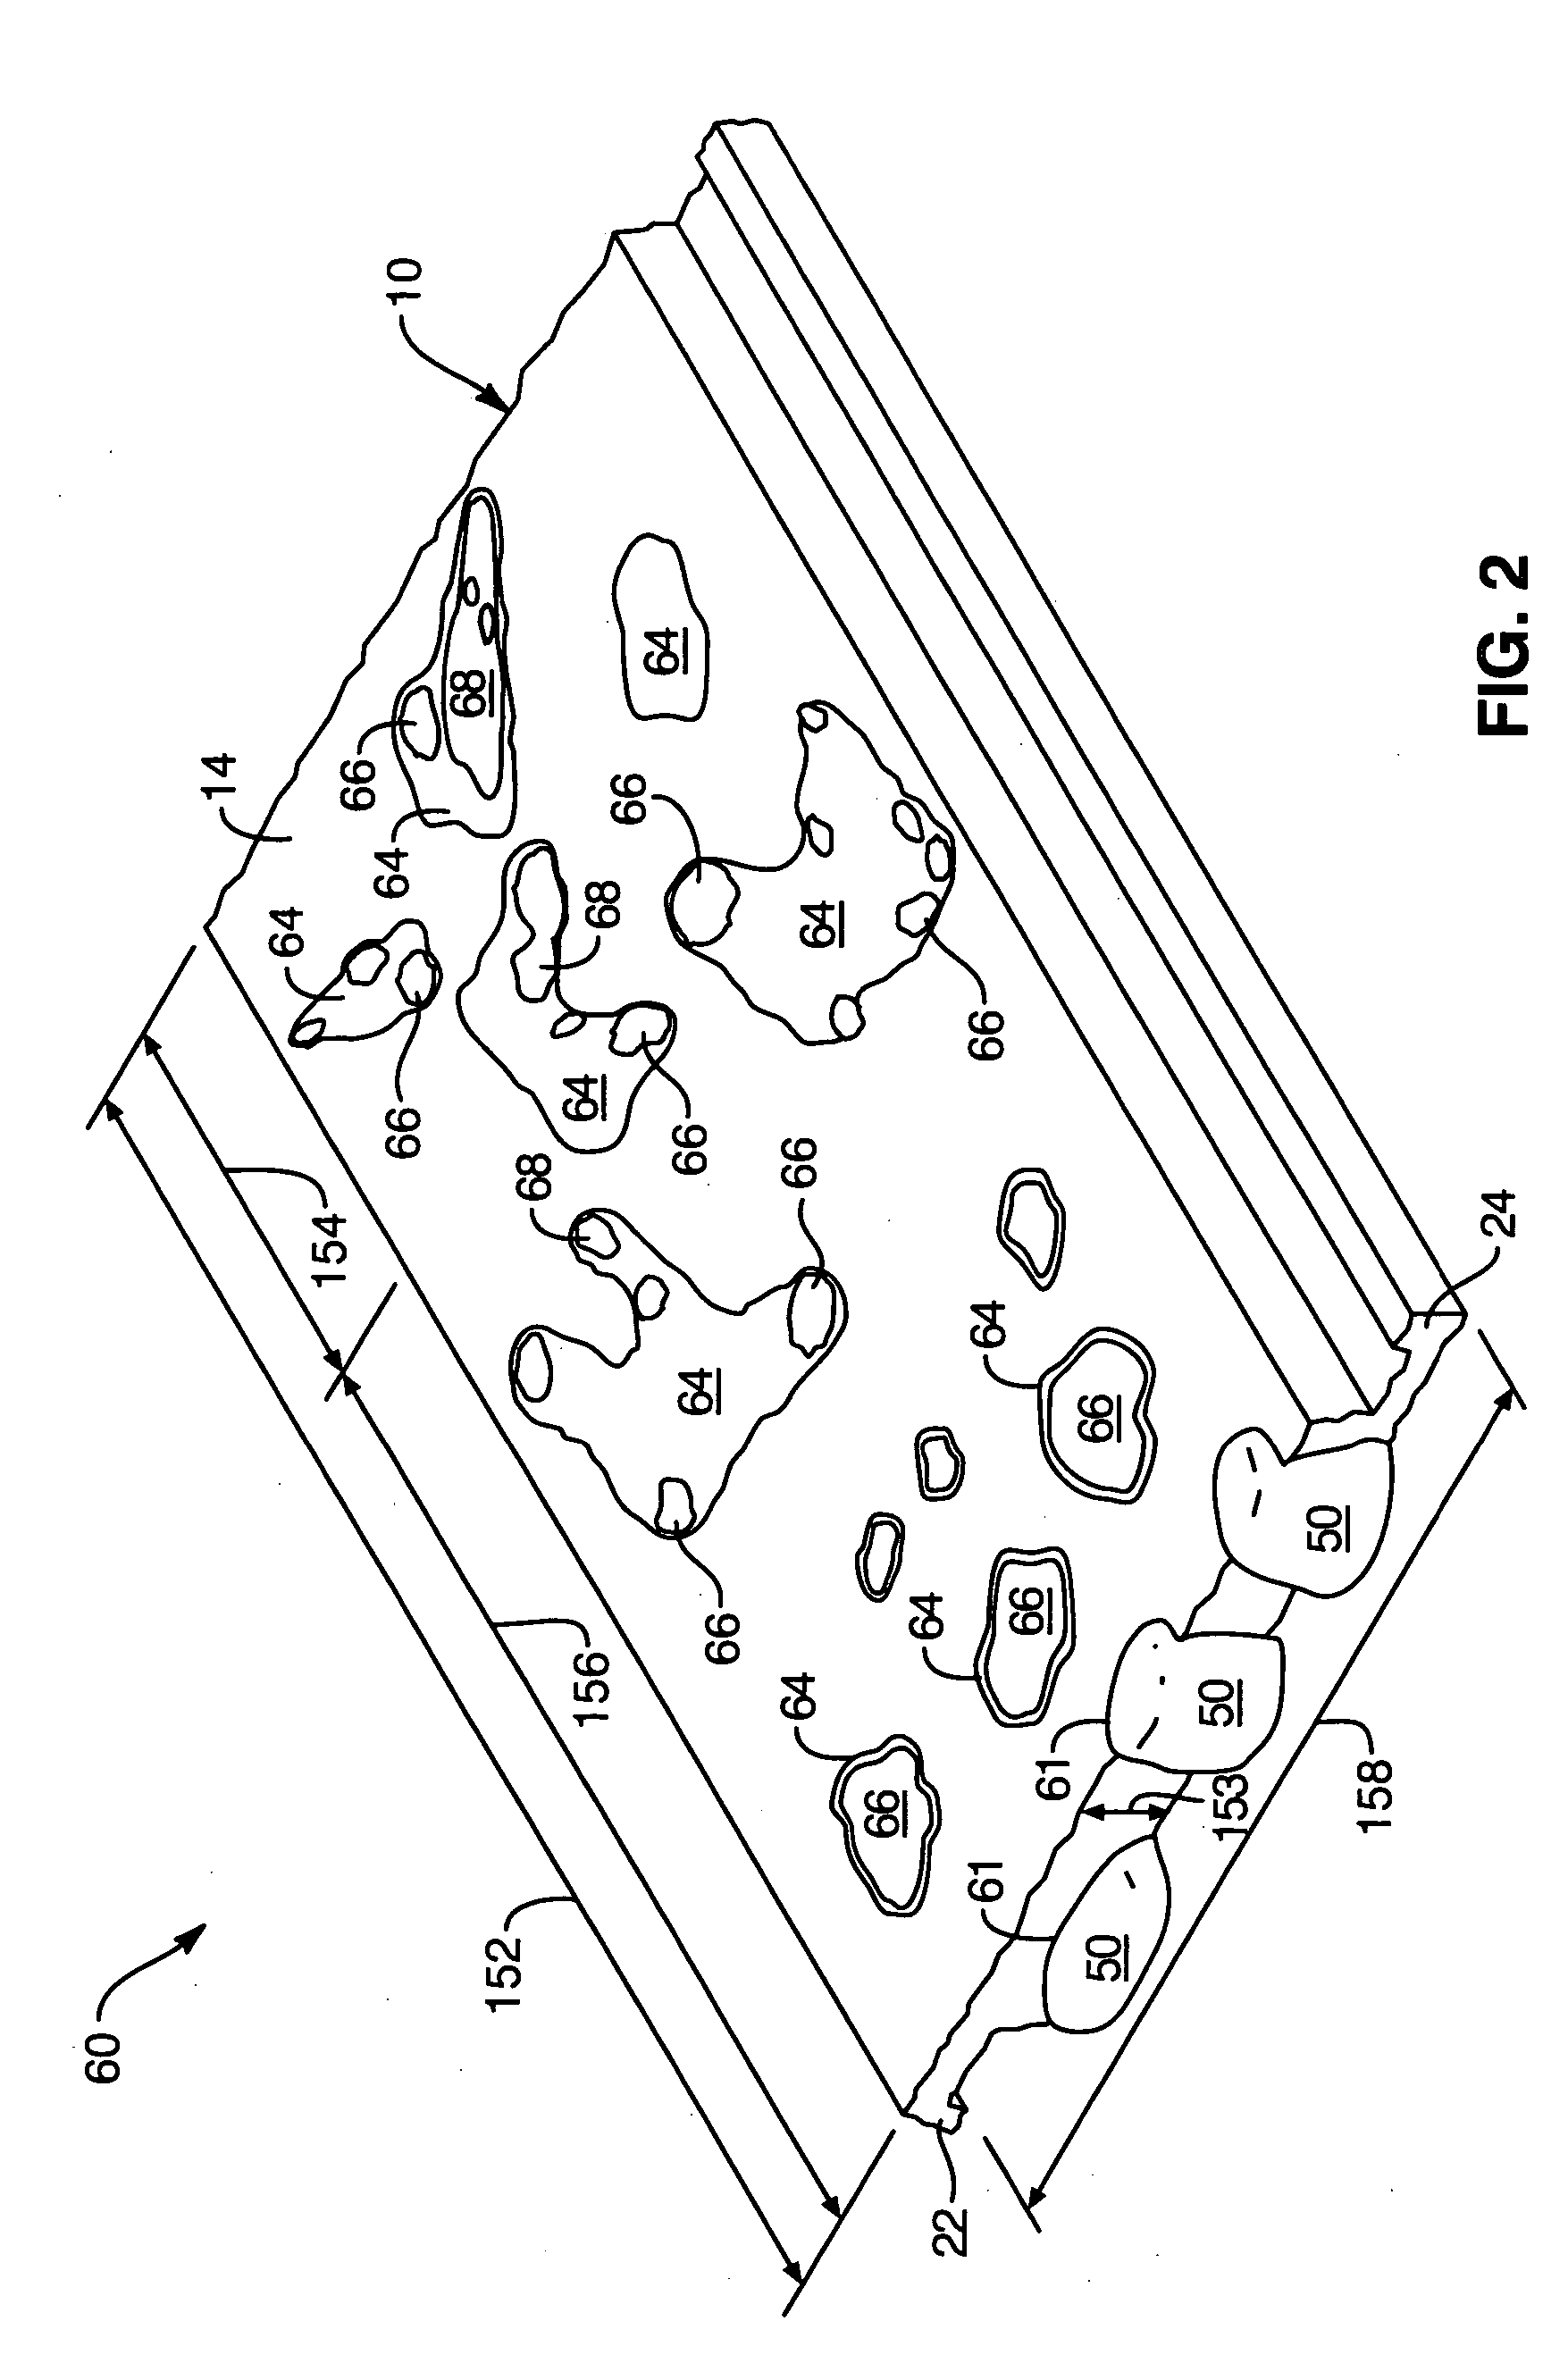 Aged roofing tile system